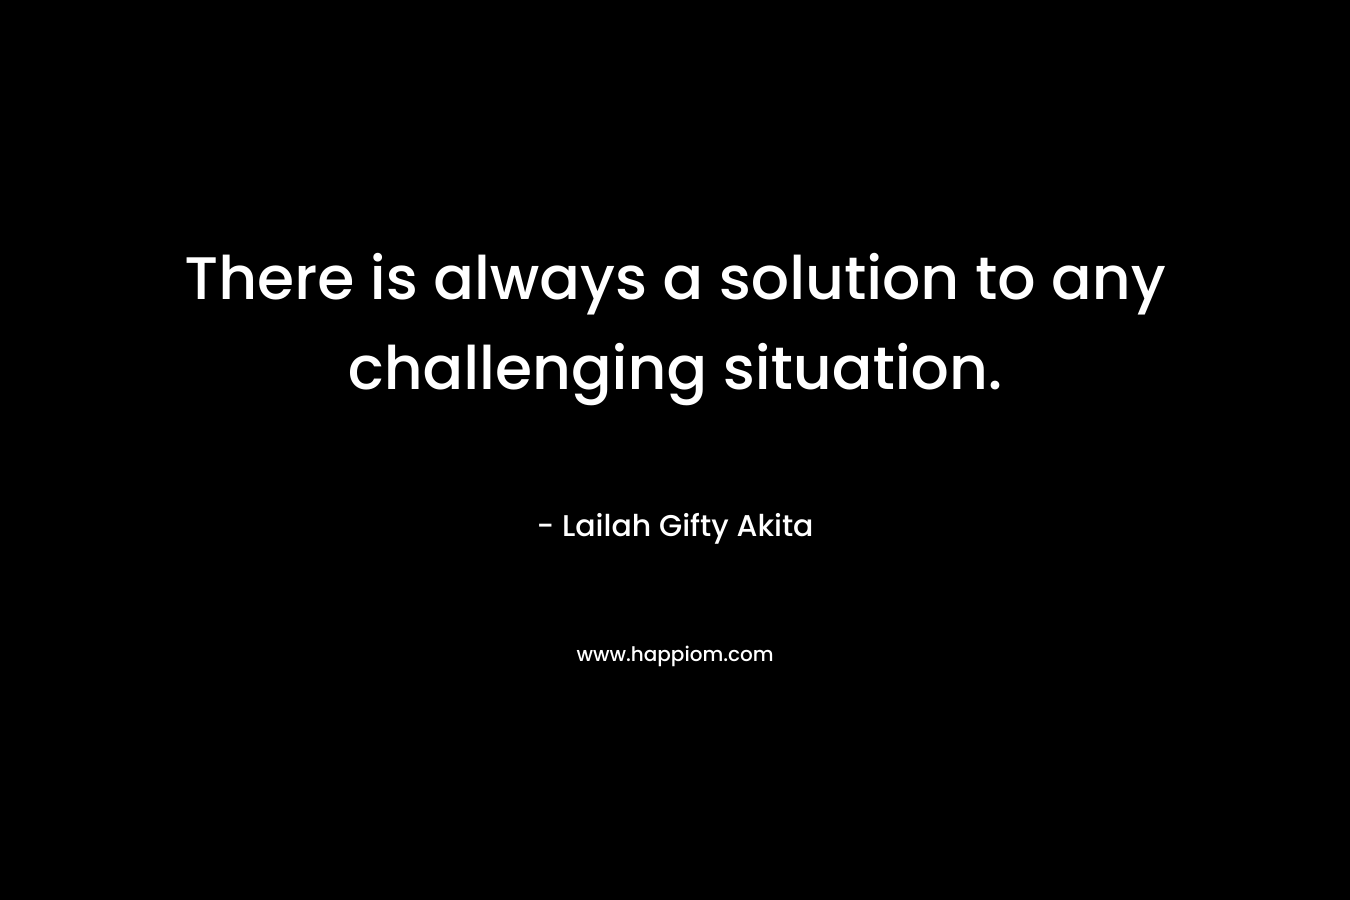 There is always a solution to any challenging situation. – Lailah Gifty Akita